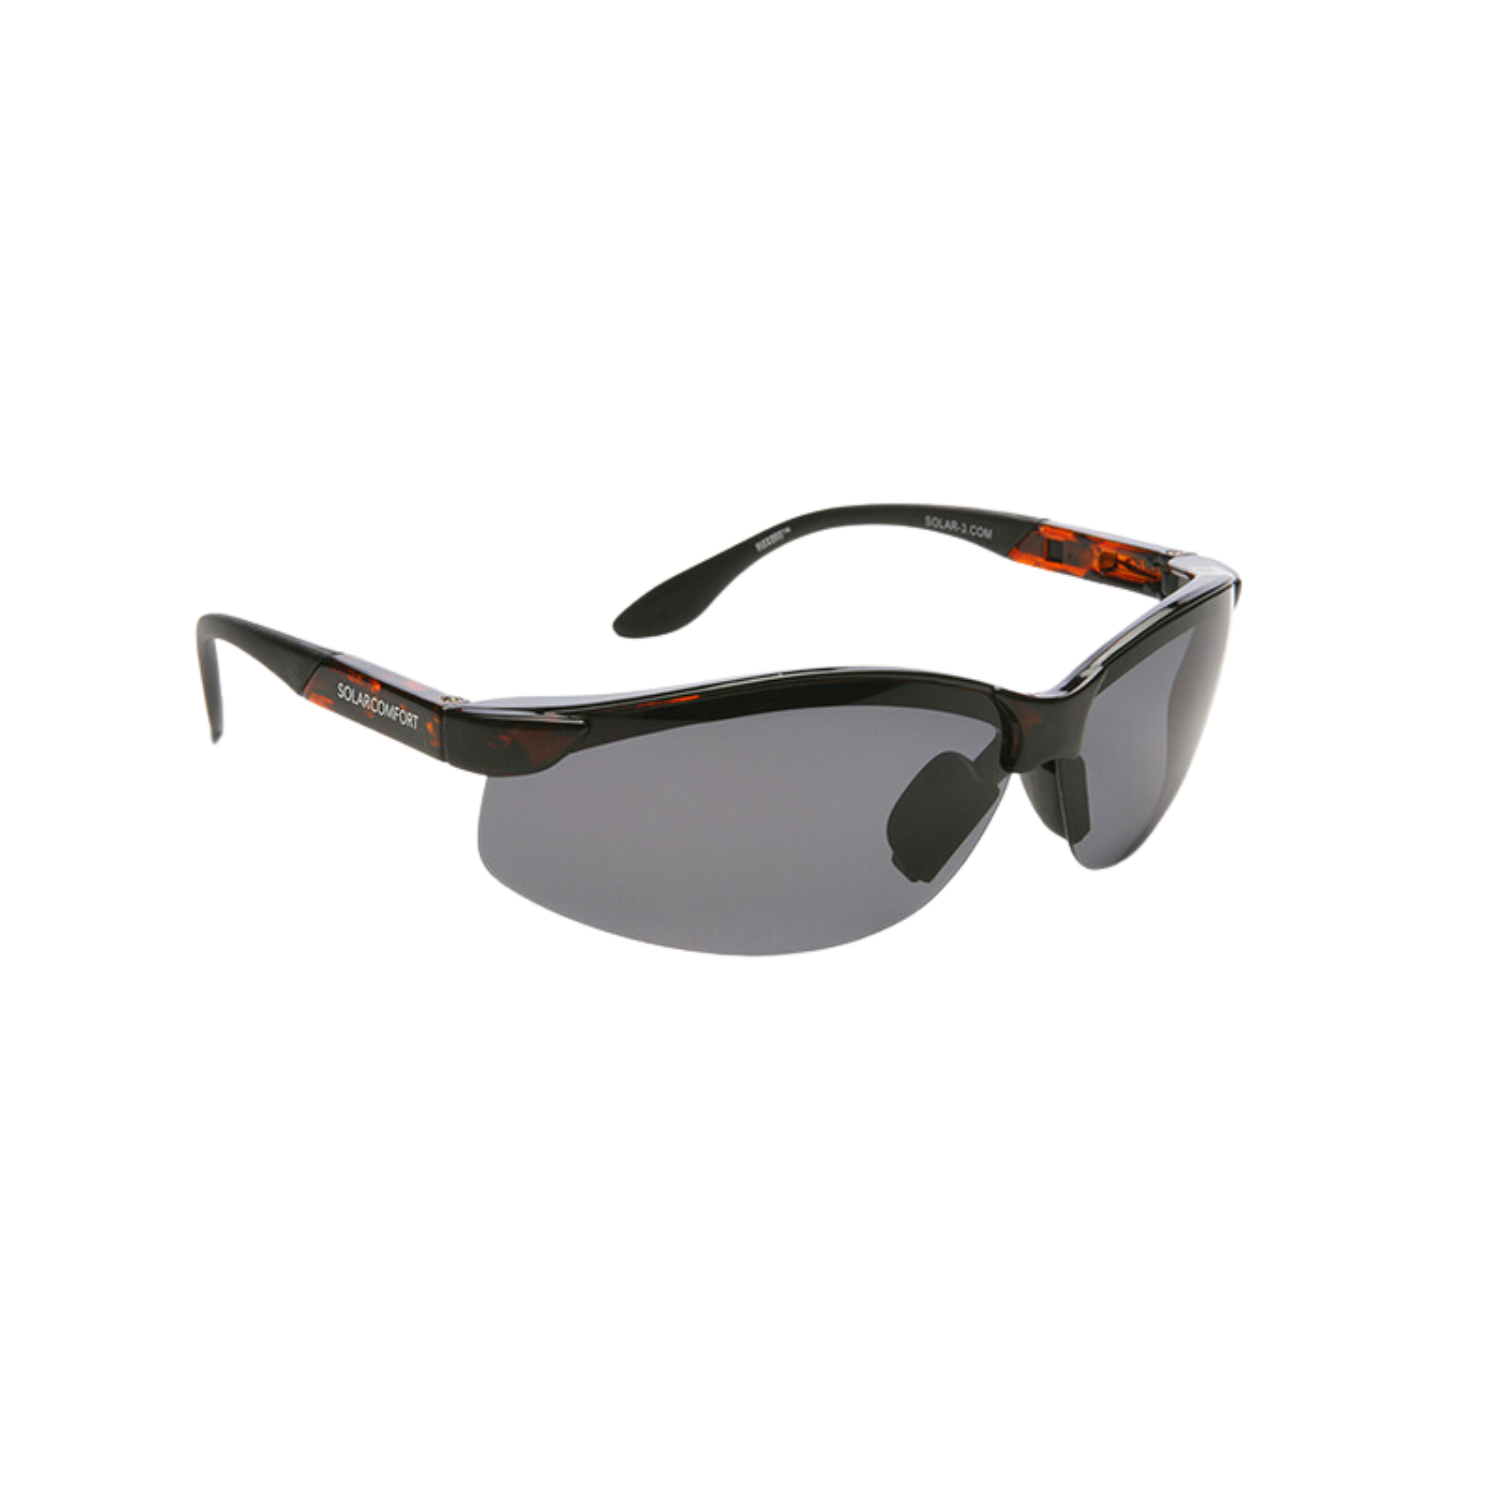 Image of the SolarComfort polarized gray glare reduction sunglases from Eschenbach.